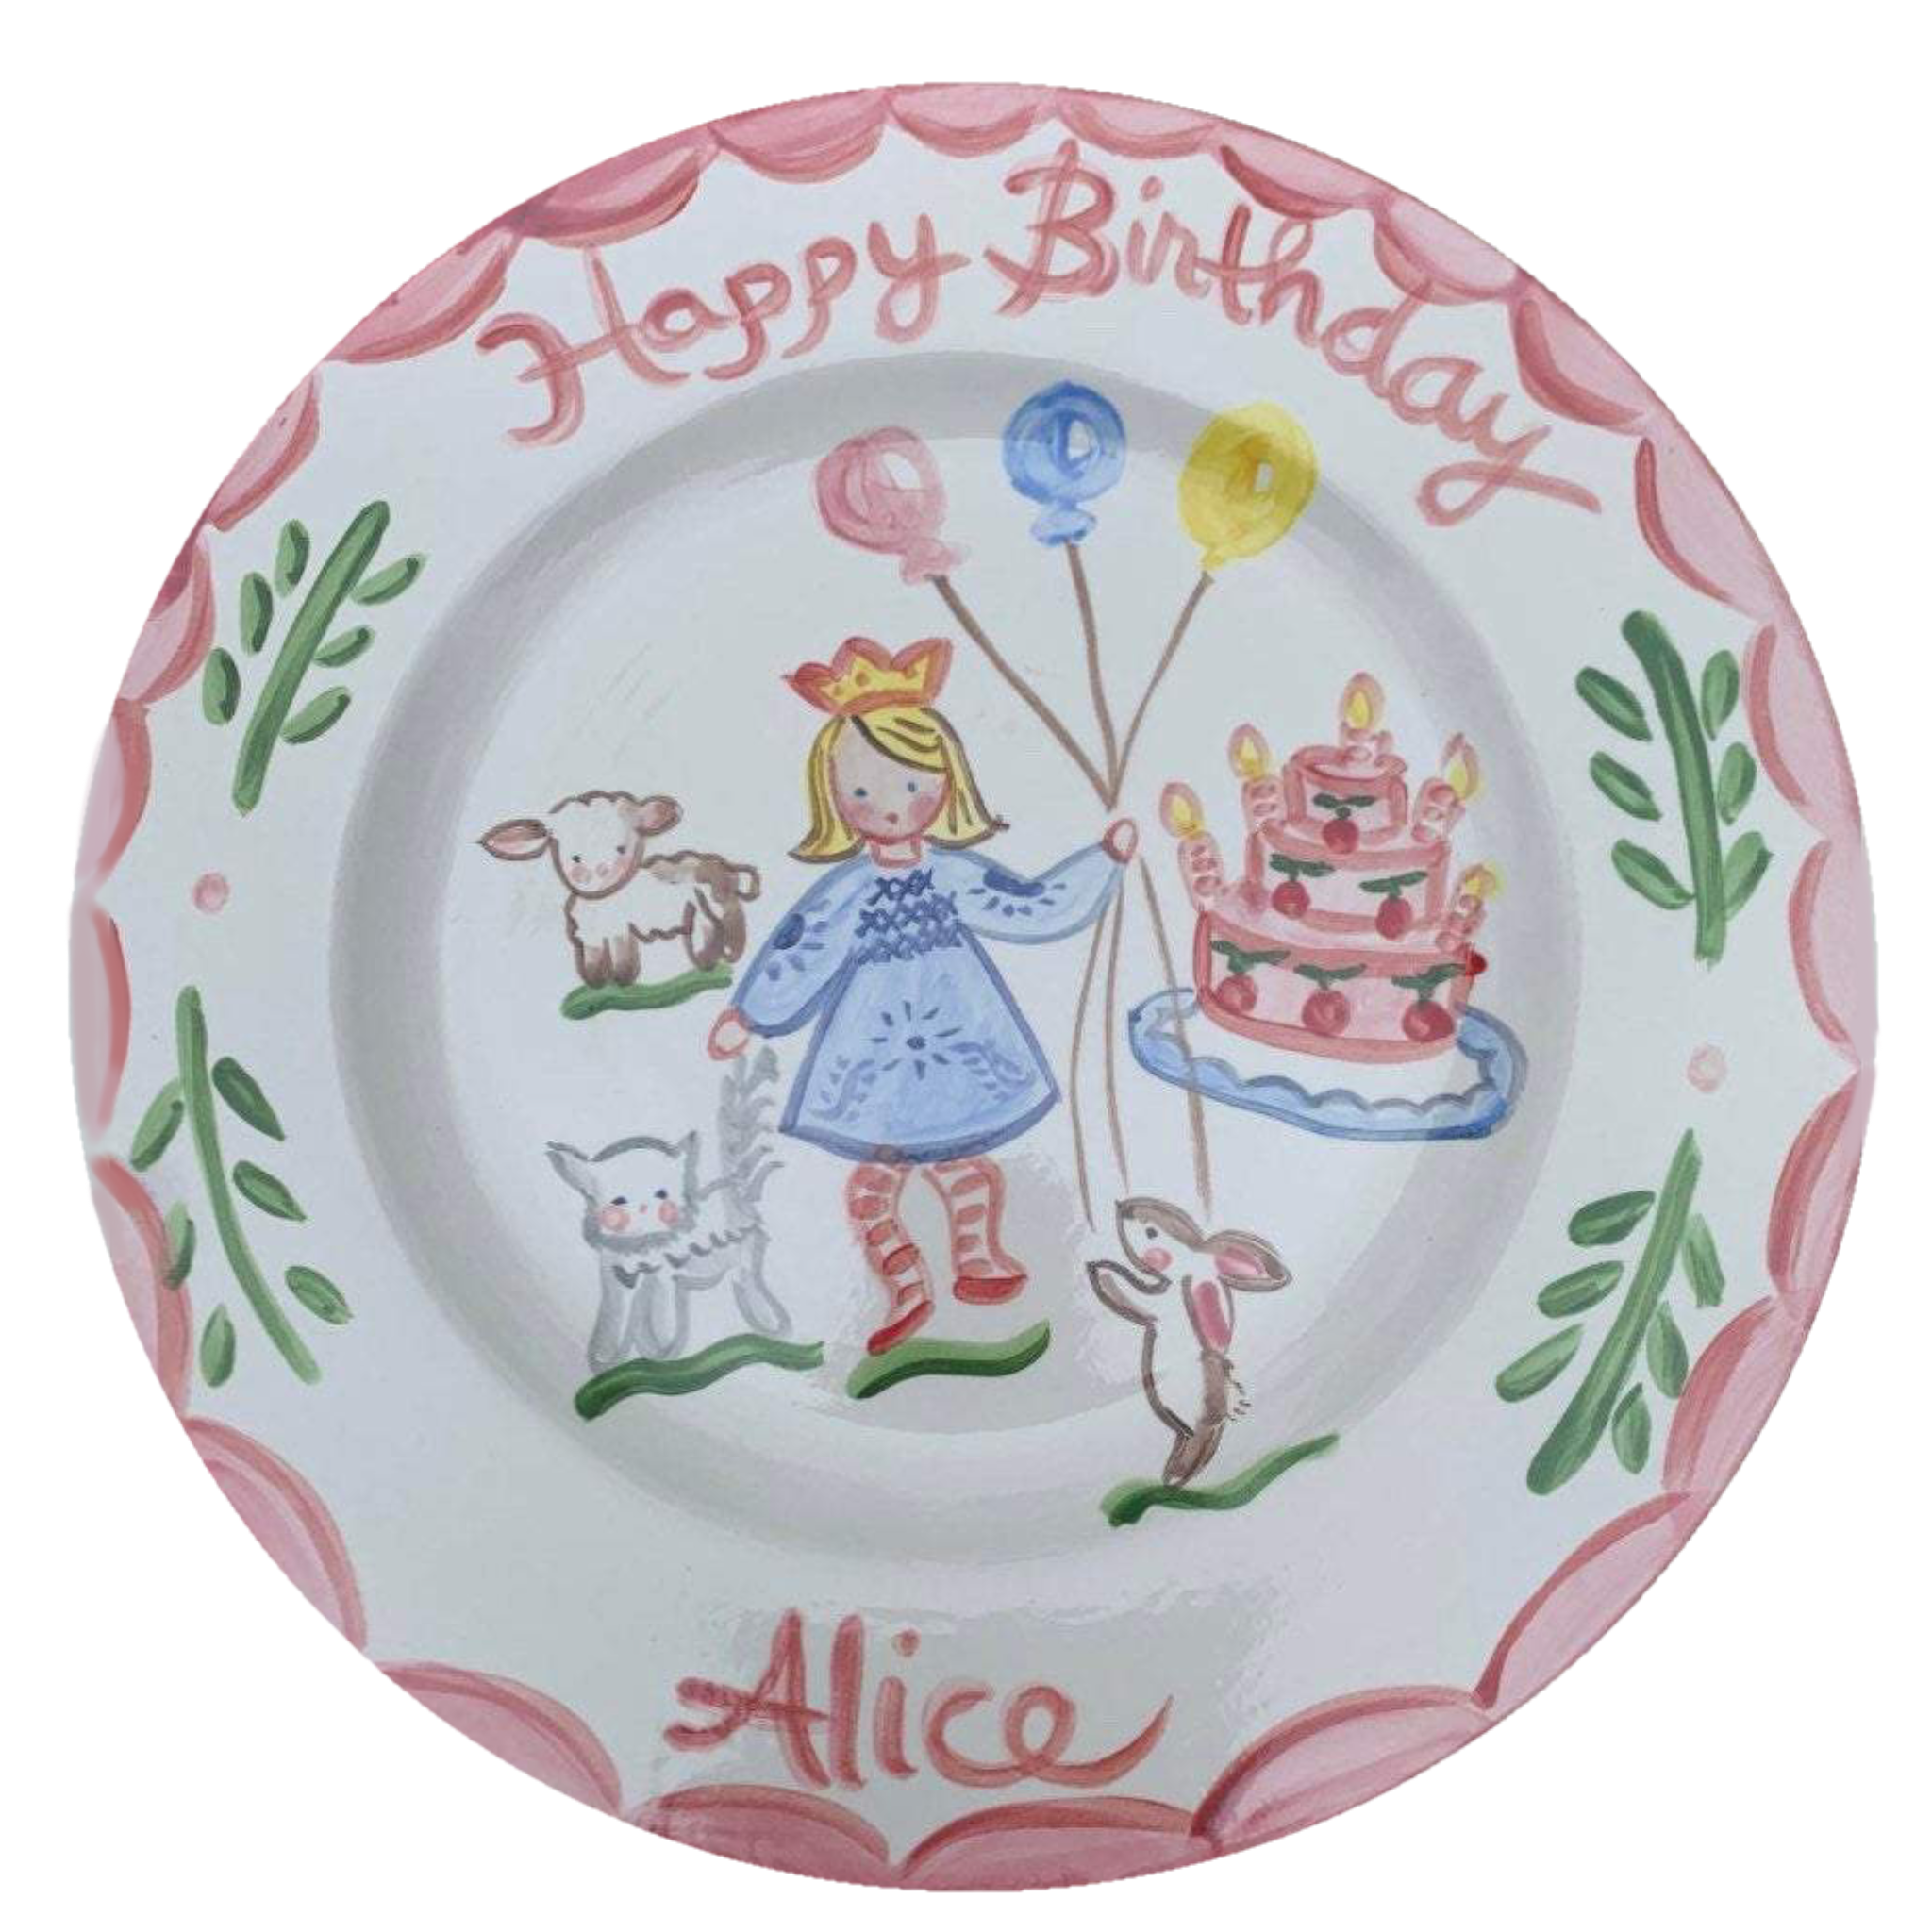 Birthday Plate - Girl, Cake, Balloons, Animals (Full Color) - Premium  from Tricia Lowenfield Shop 